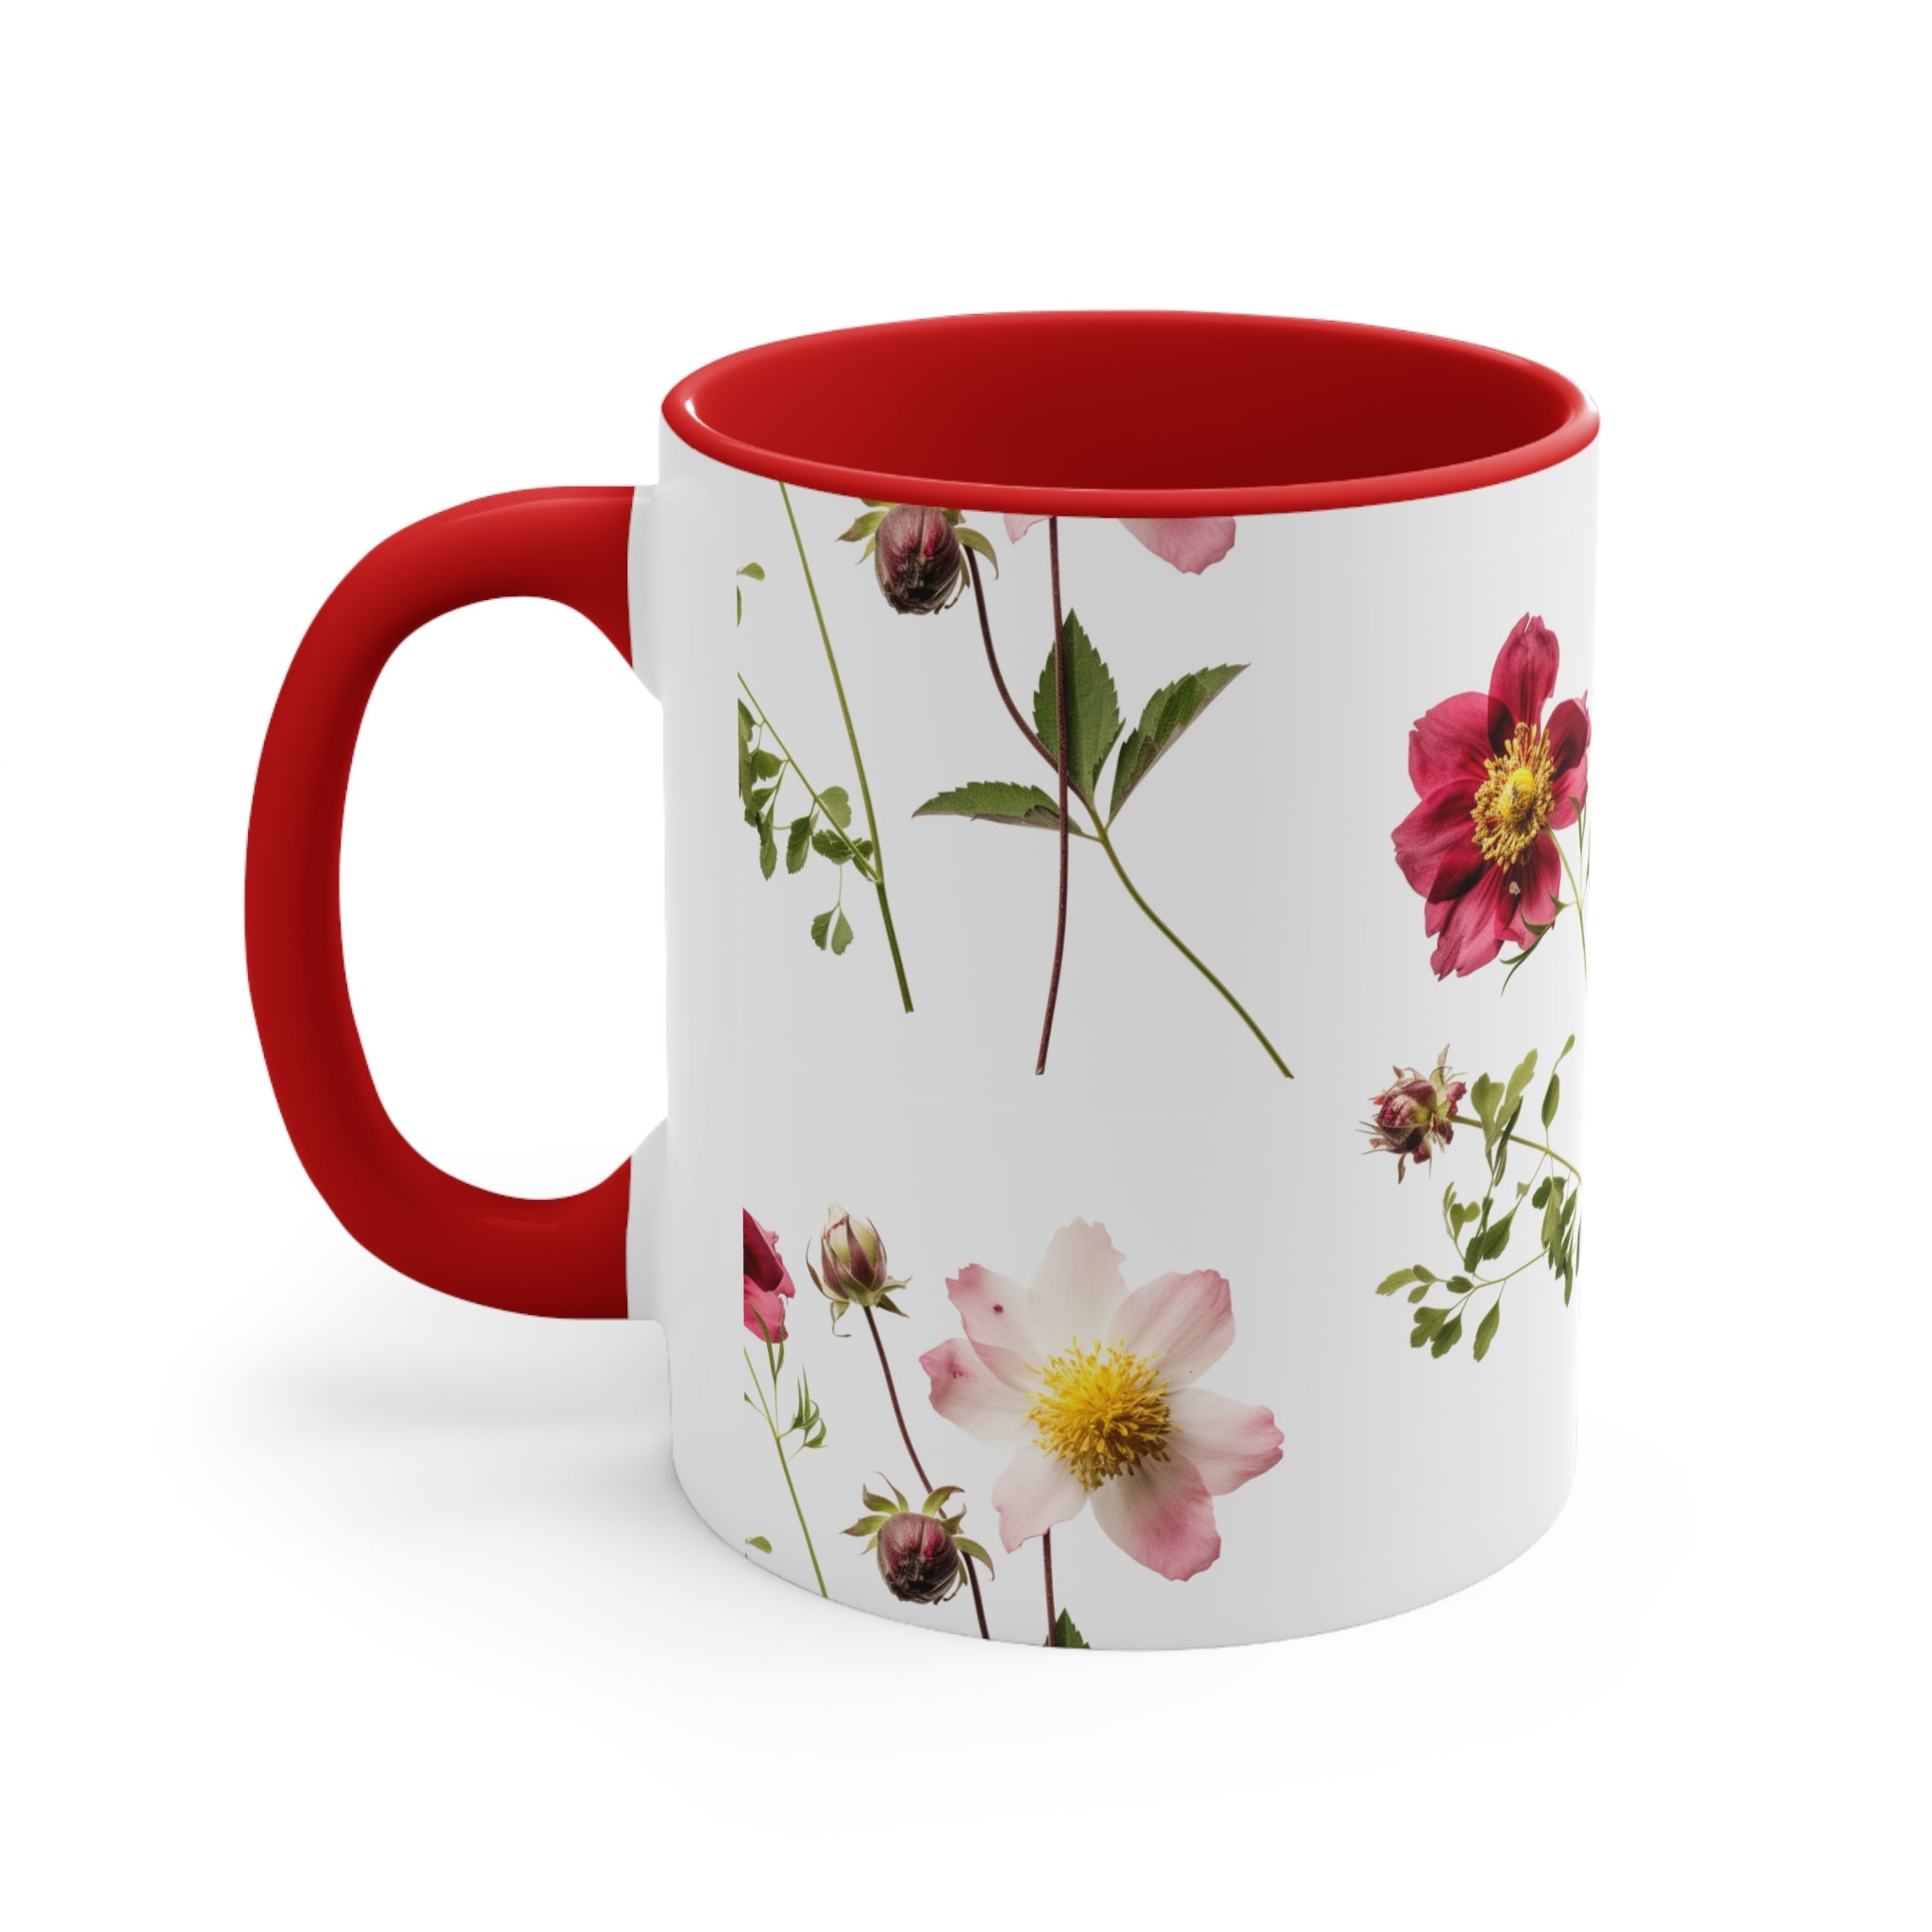 Cute Floral Coffee Mug Coffee Cup With Beautiful Photorealistic Flowers for Hot Starbucks Coffee or Yeti Drinks